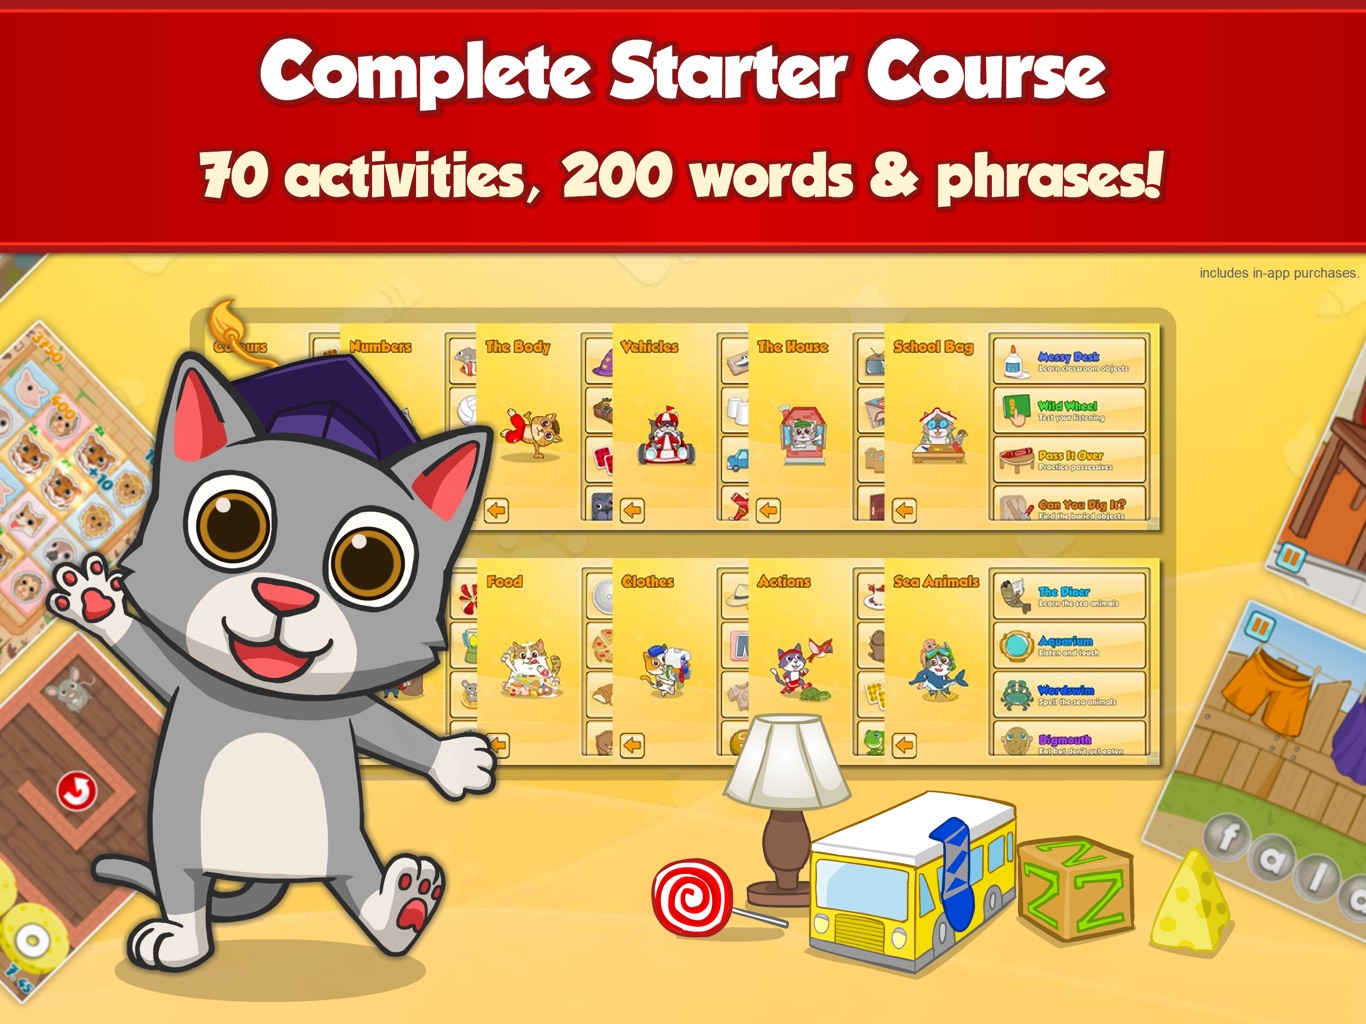 10 Fun Language Learning Games to Play with Friends